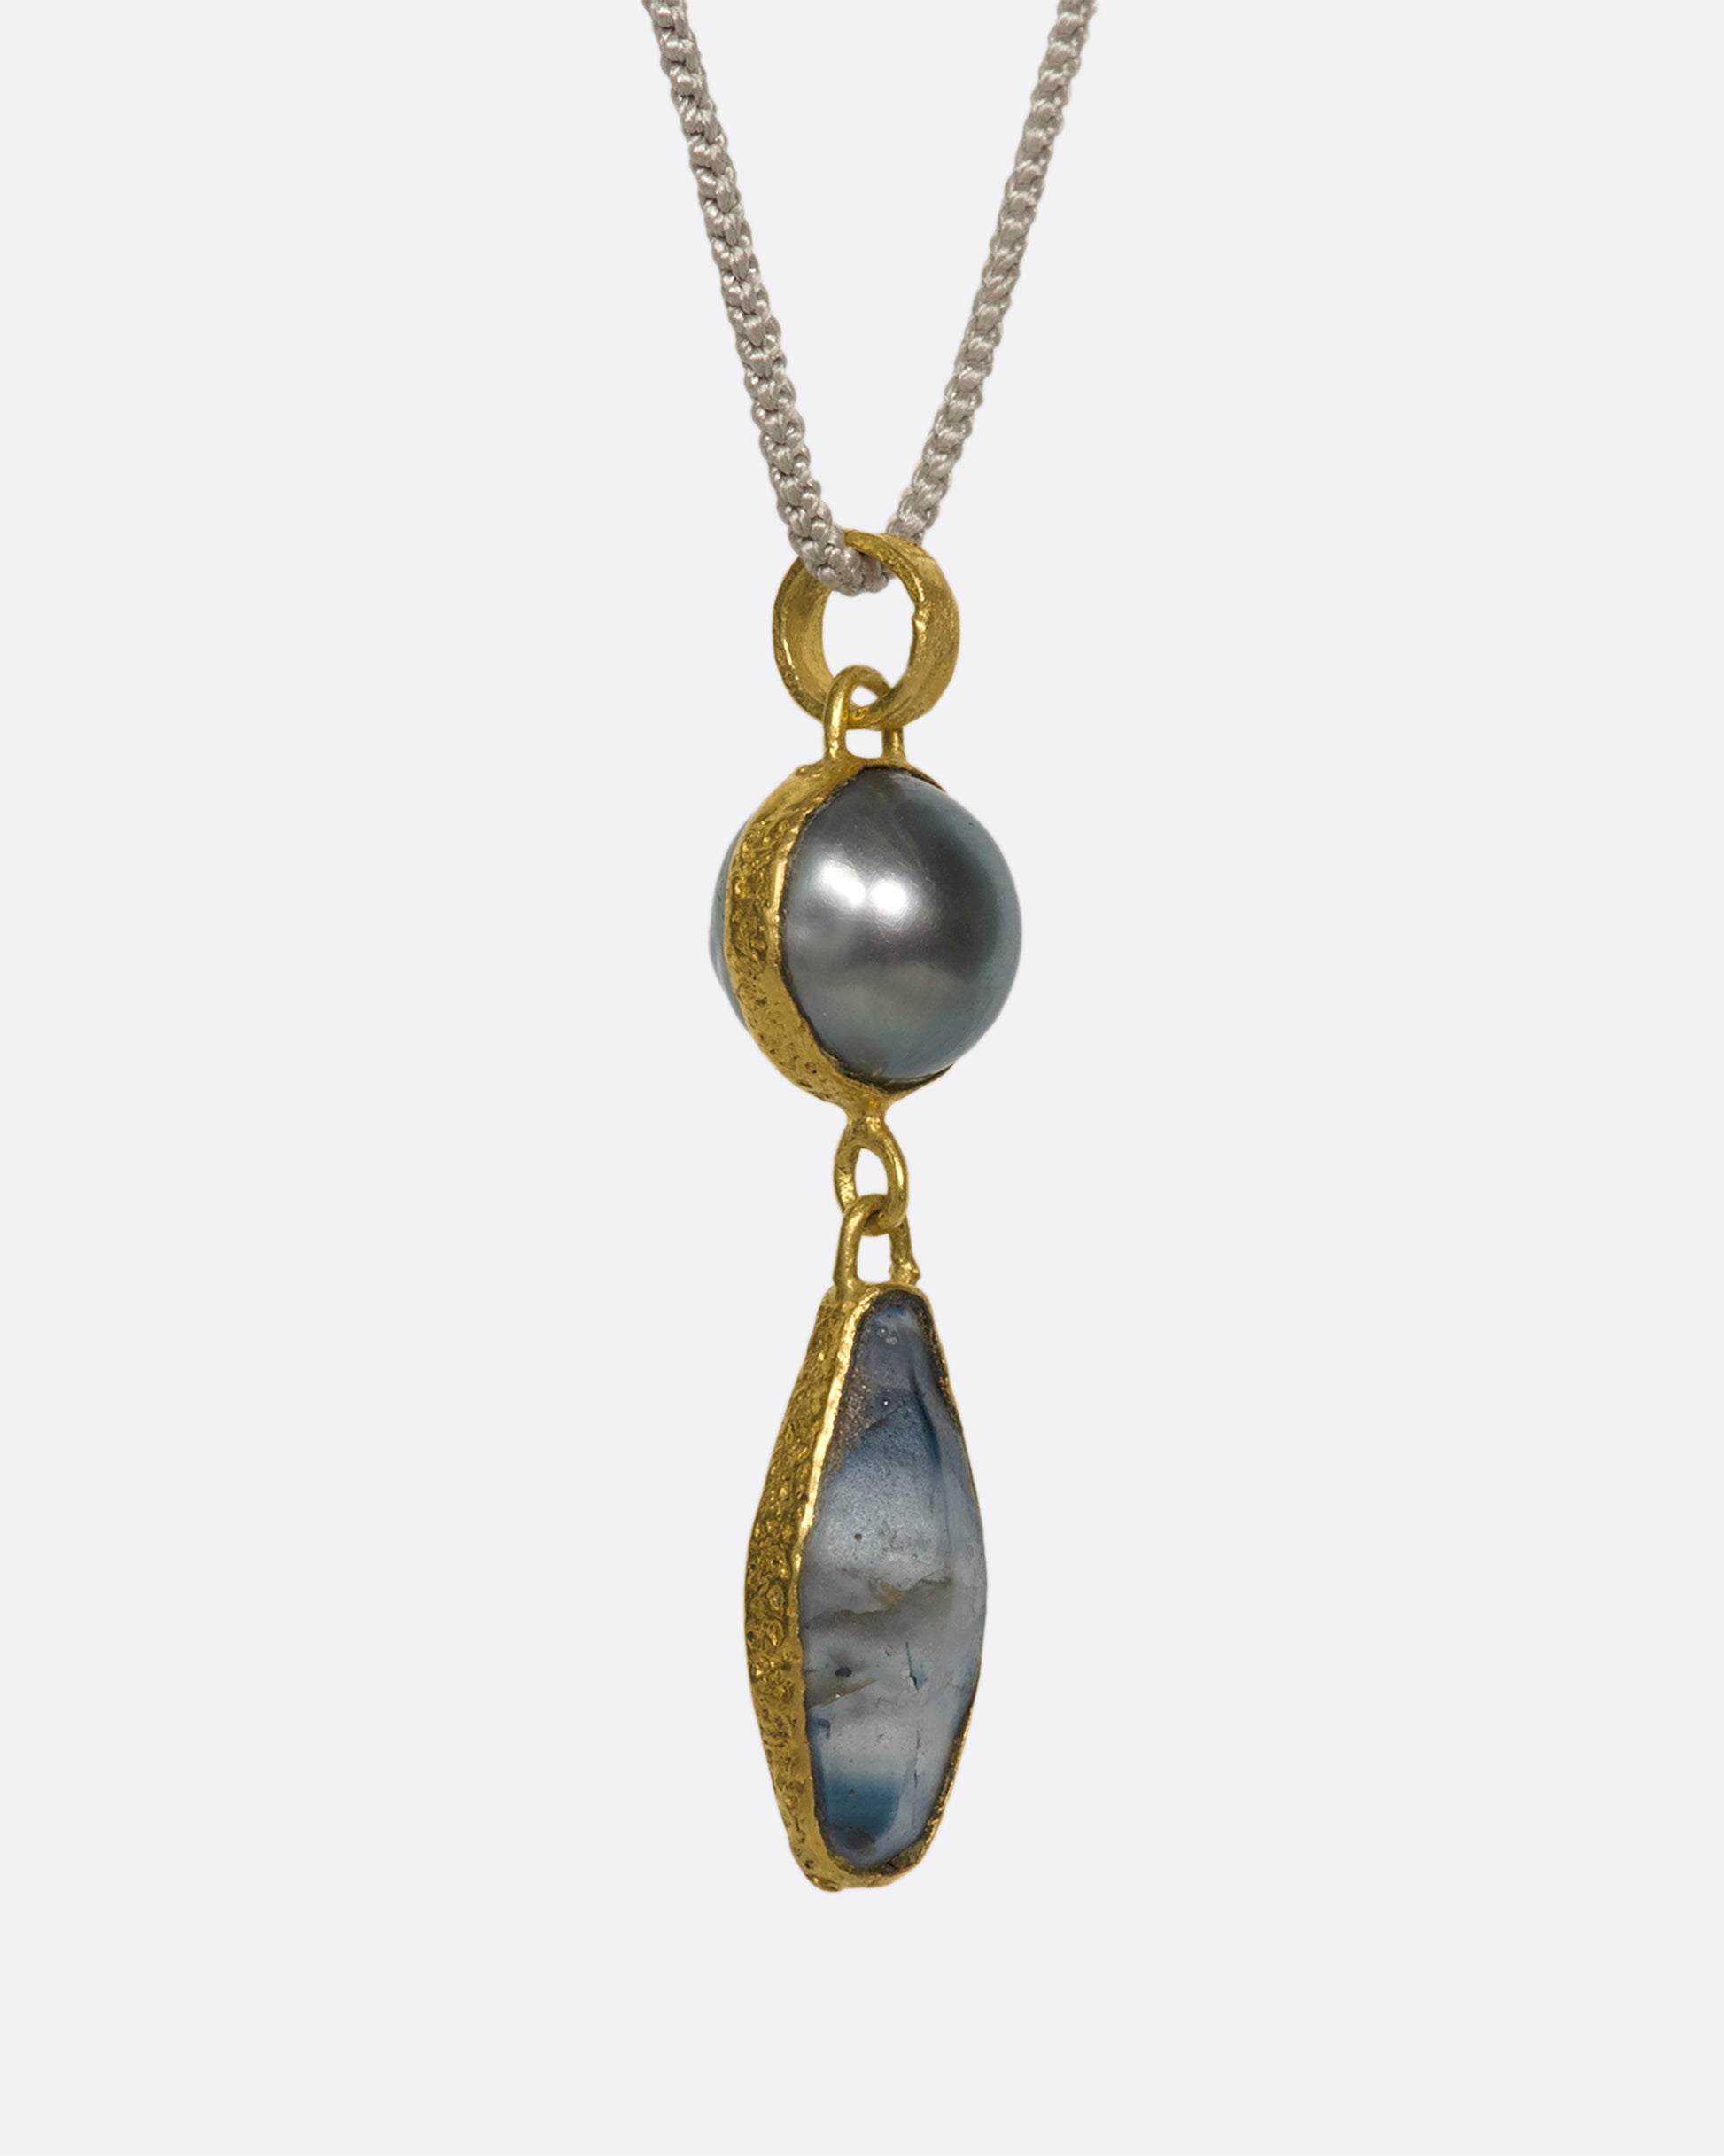 A close up of a hanging yellow gold pendant with a pearl and Sri Lankan sapphire on a cord.